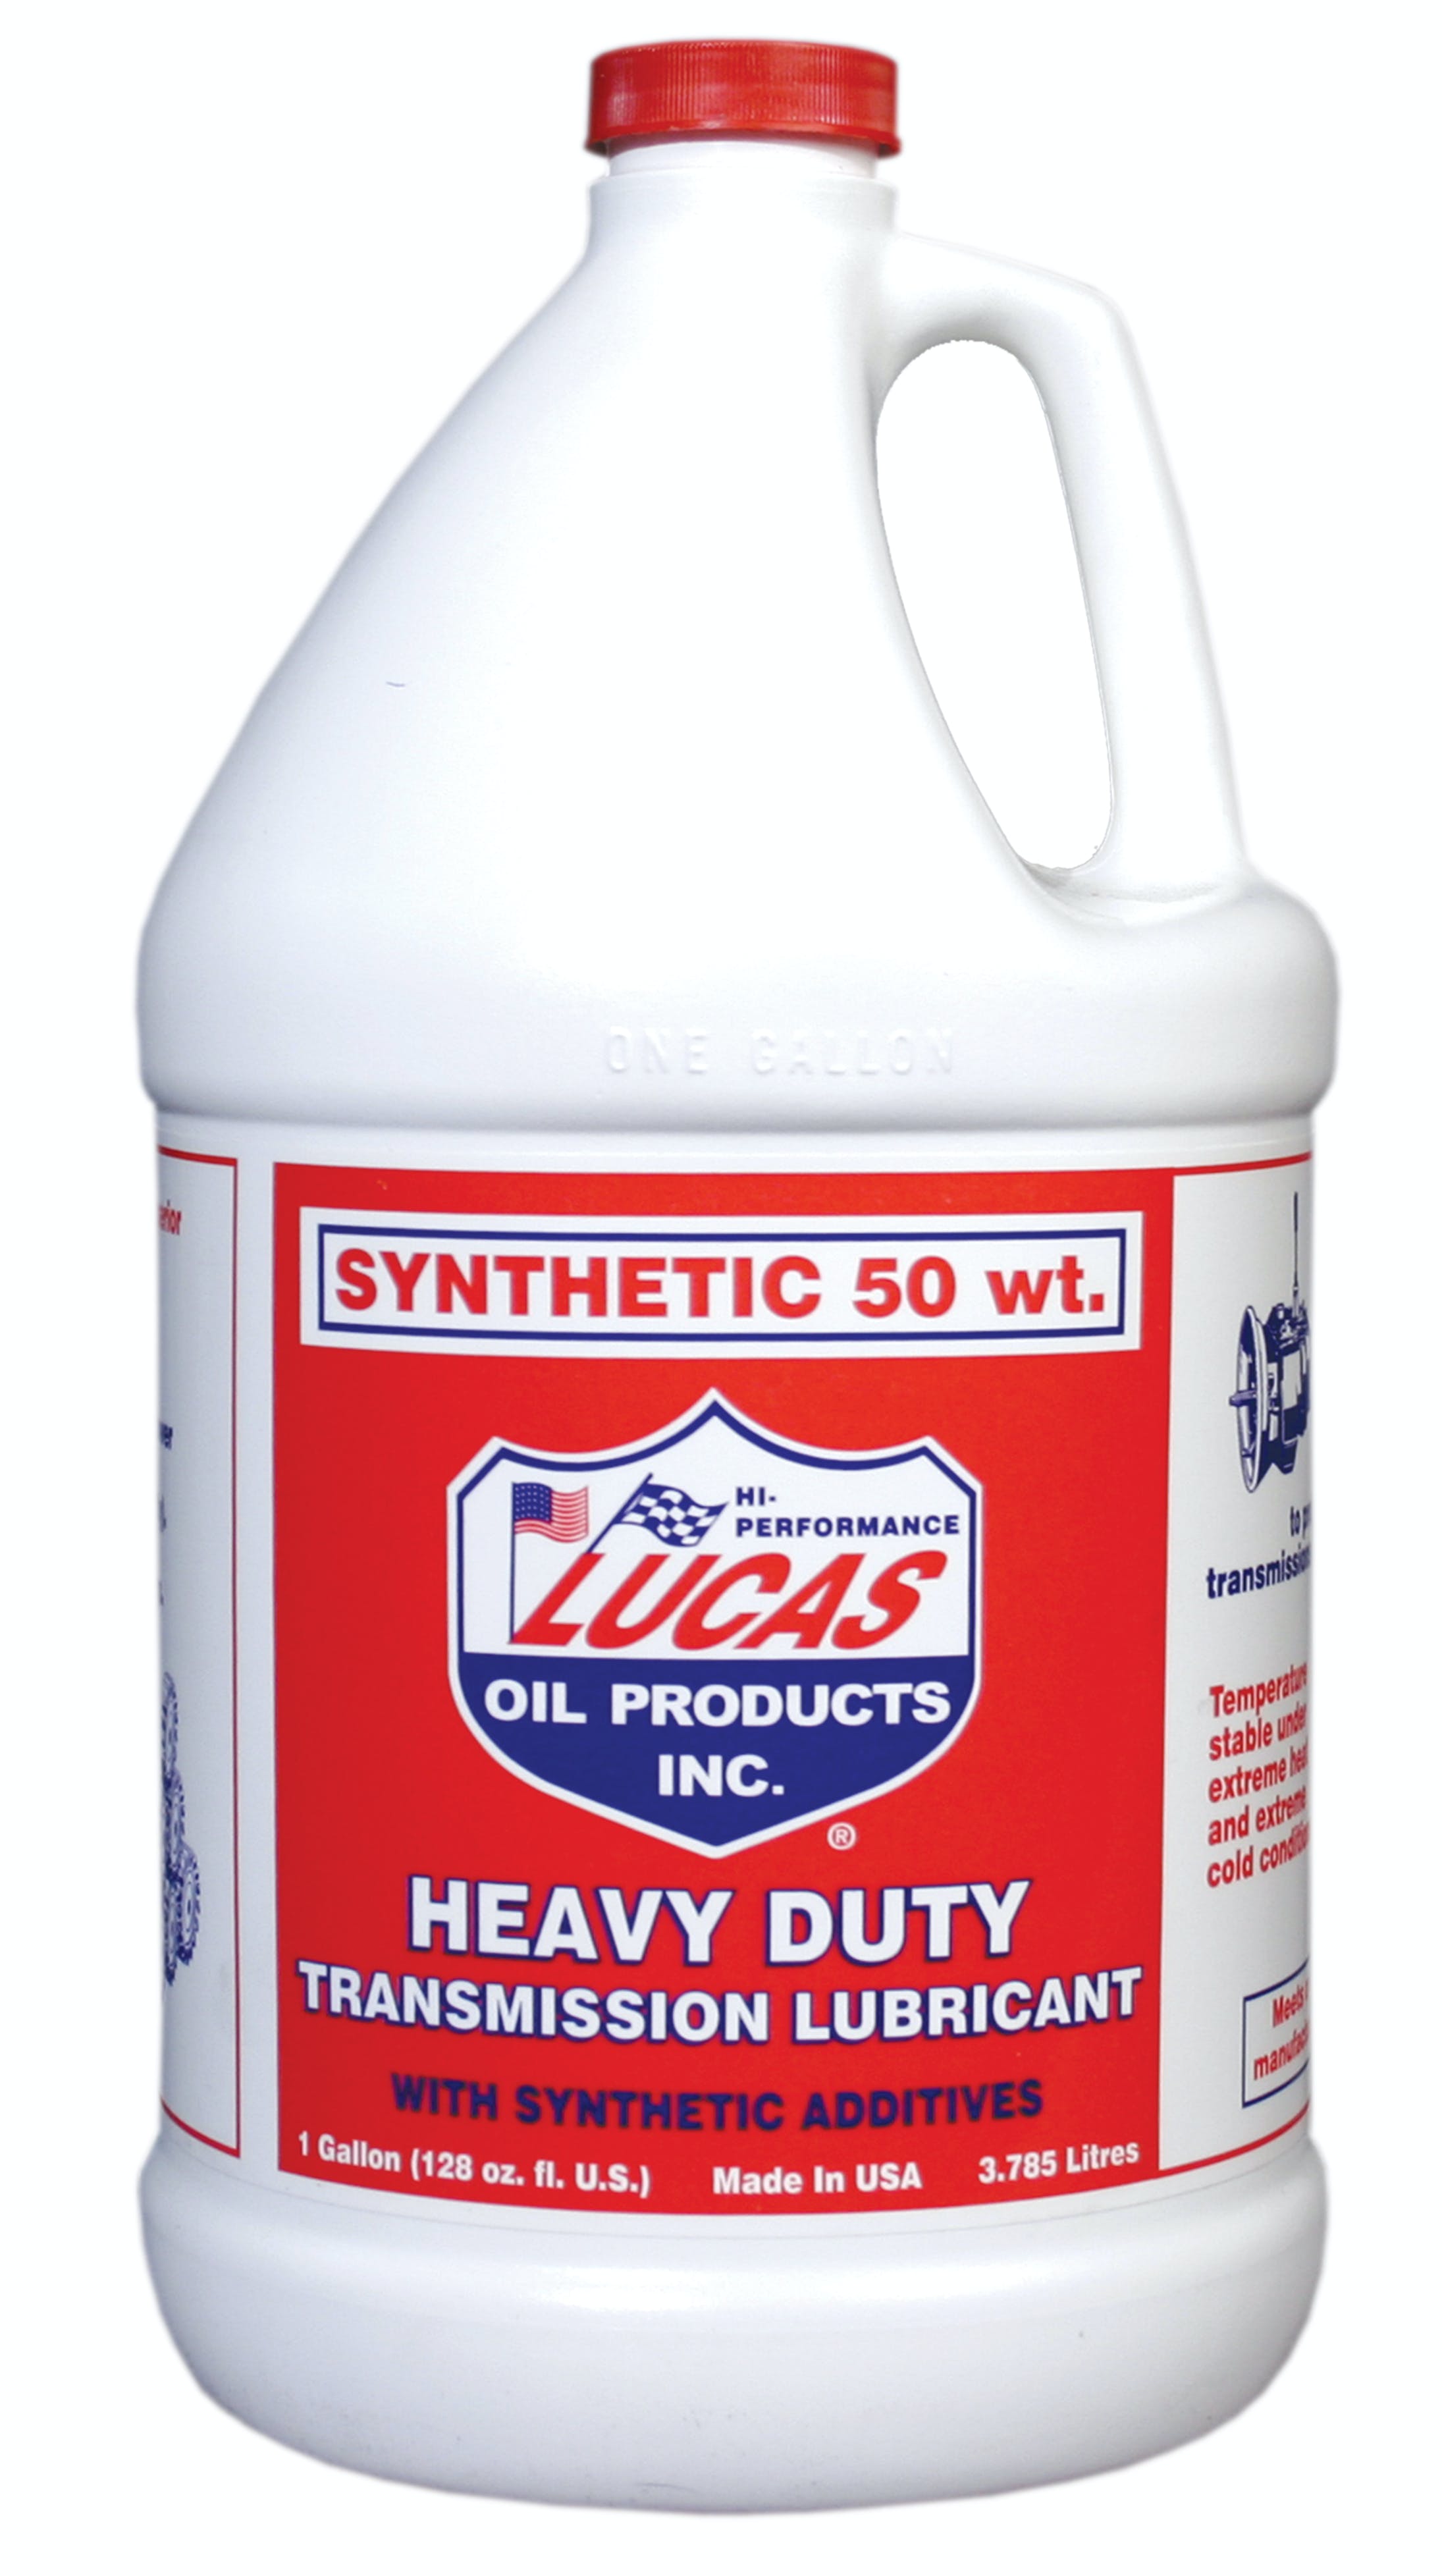 Lucas OIL Synthetic 50 wt. Trans Lubricant 10146